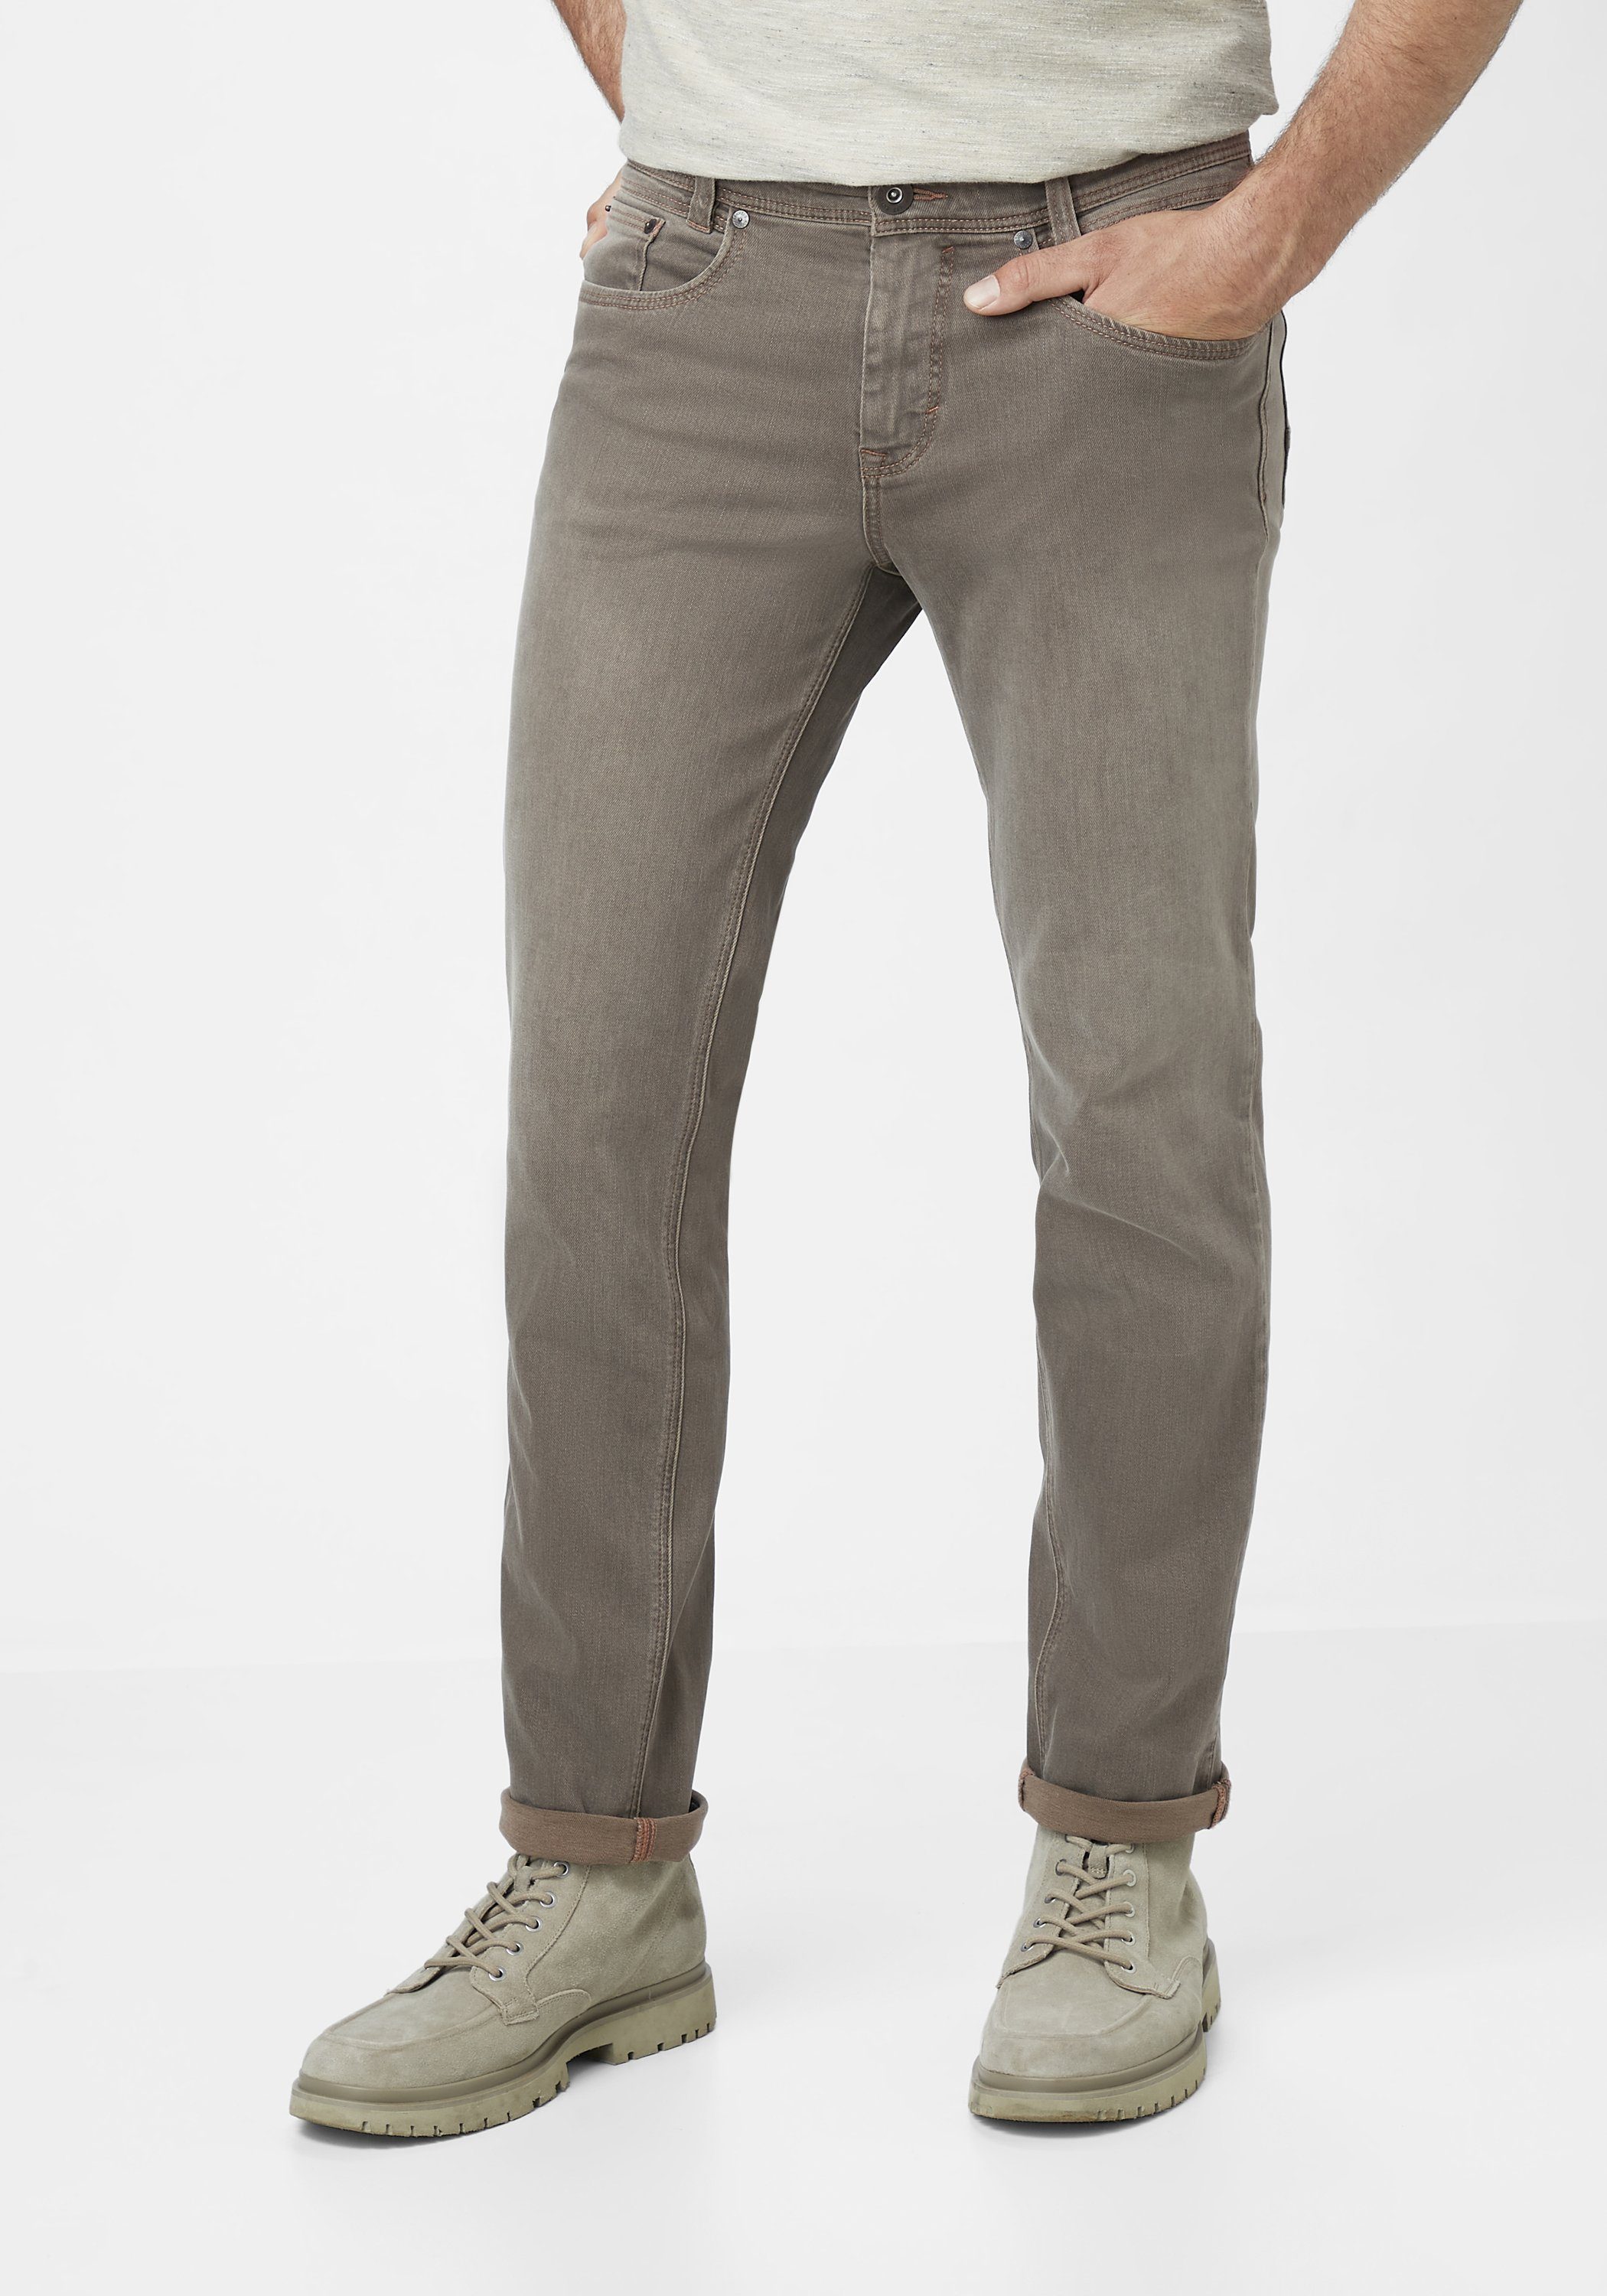 Paddock's Slim-fit-Jeans PIPE 5-Pocket Jeans mit Motion & Comfort Stretch | Stretchjeans